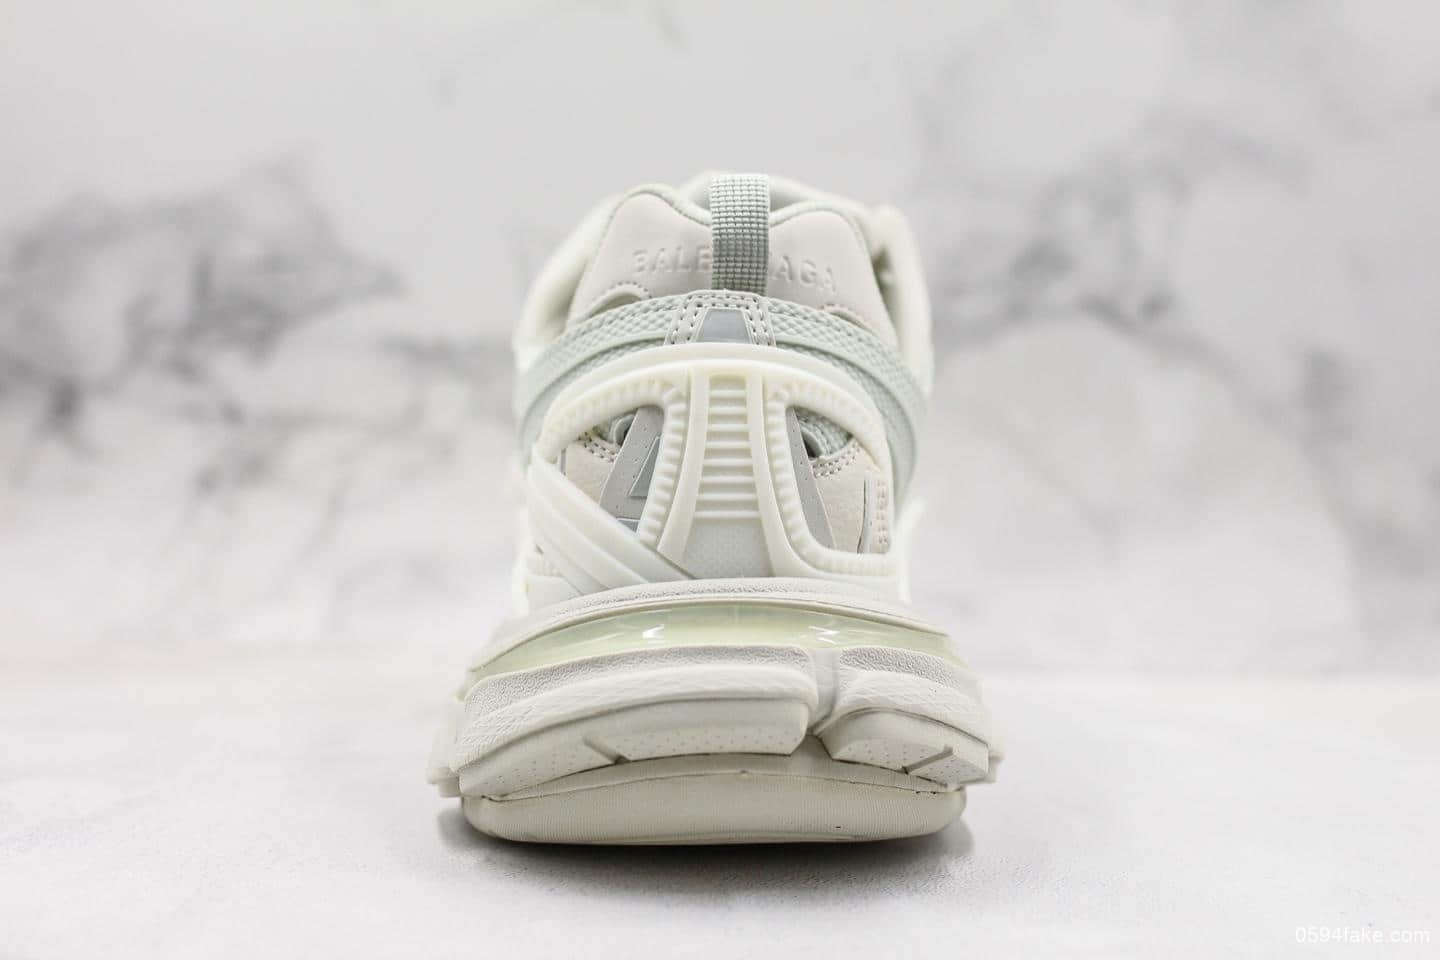 What do you think of the Balenciaga Track 